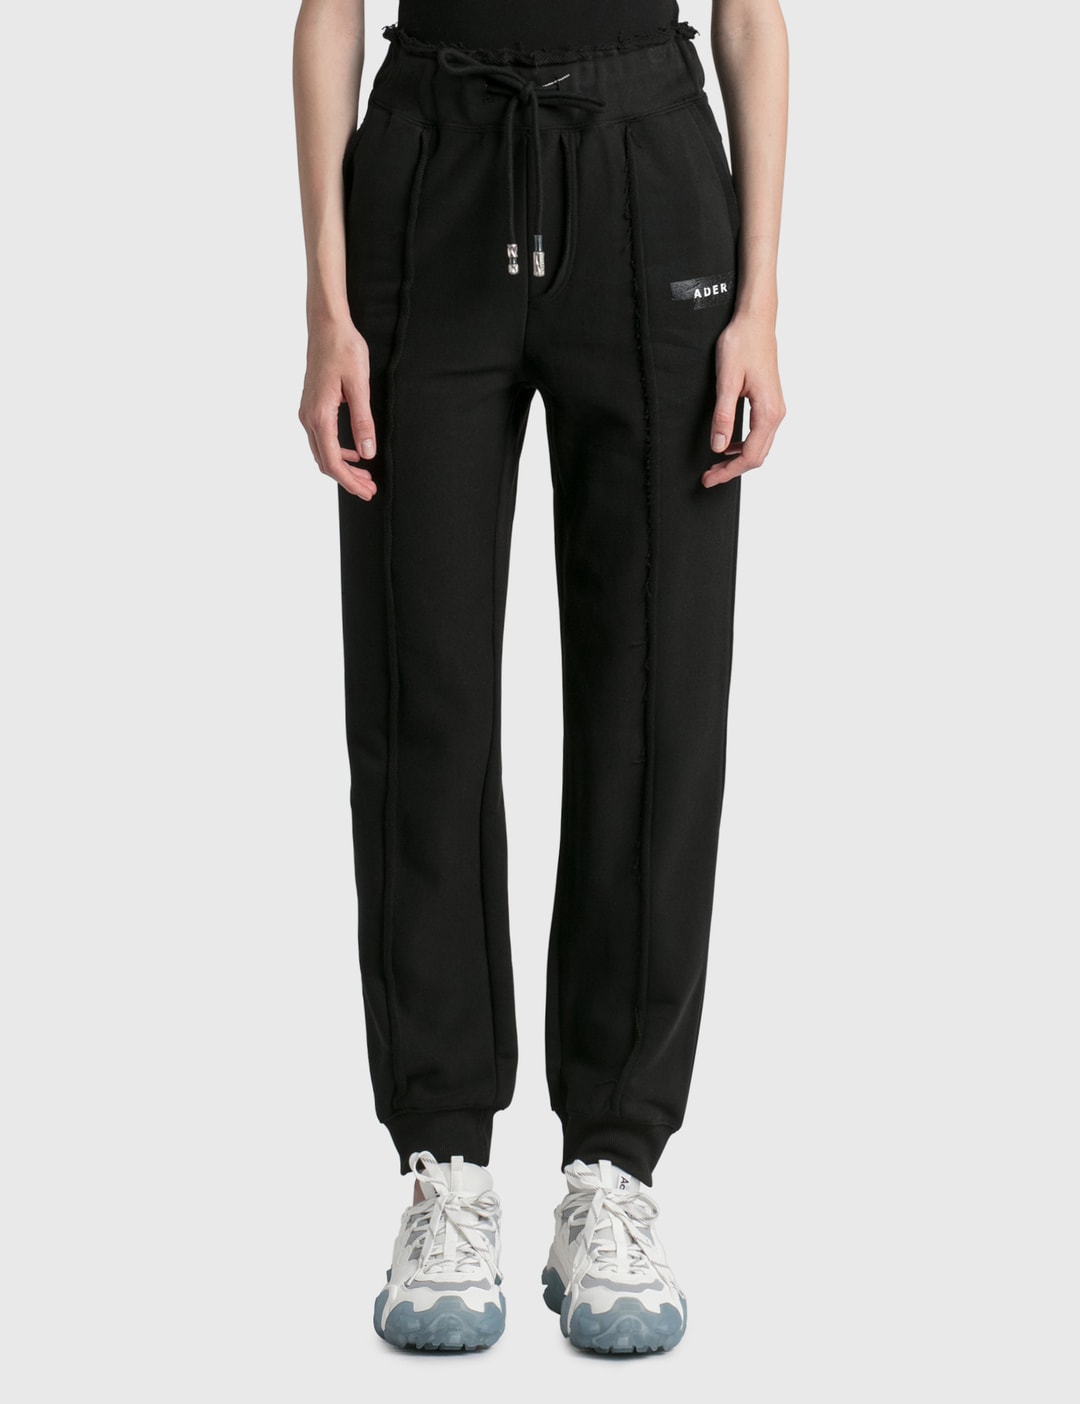 Ader Error - Duct Tape Sweatpants | HBX - Globally Curated Fashion and ...